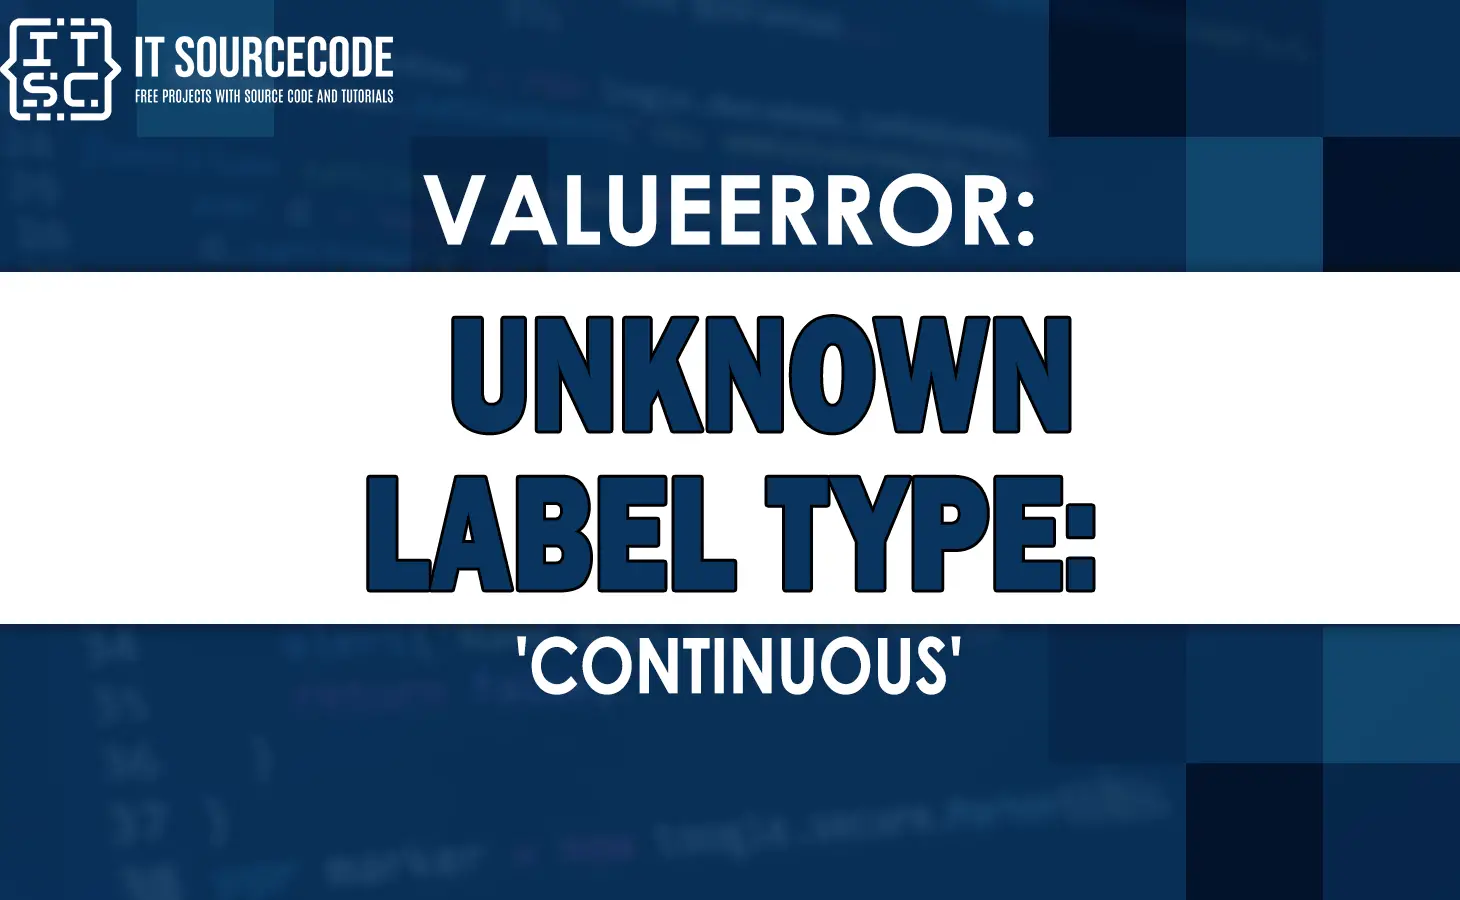 Are you experiencing a ValueError: Unknown label type: 'continuous' in Python? This article explains the error and provides solutions on how to fix it.